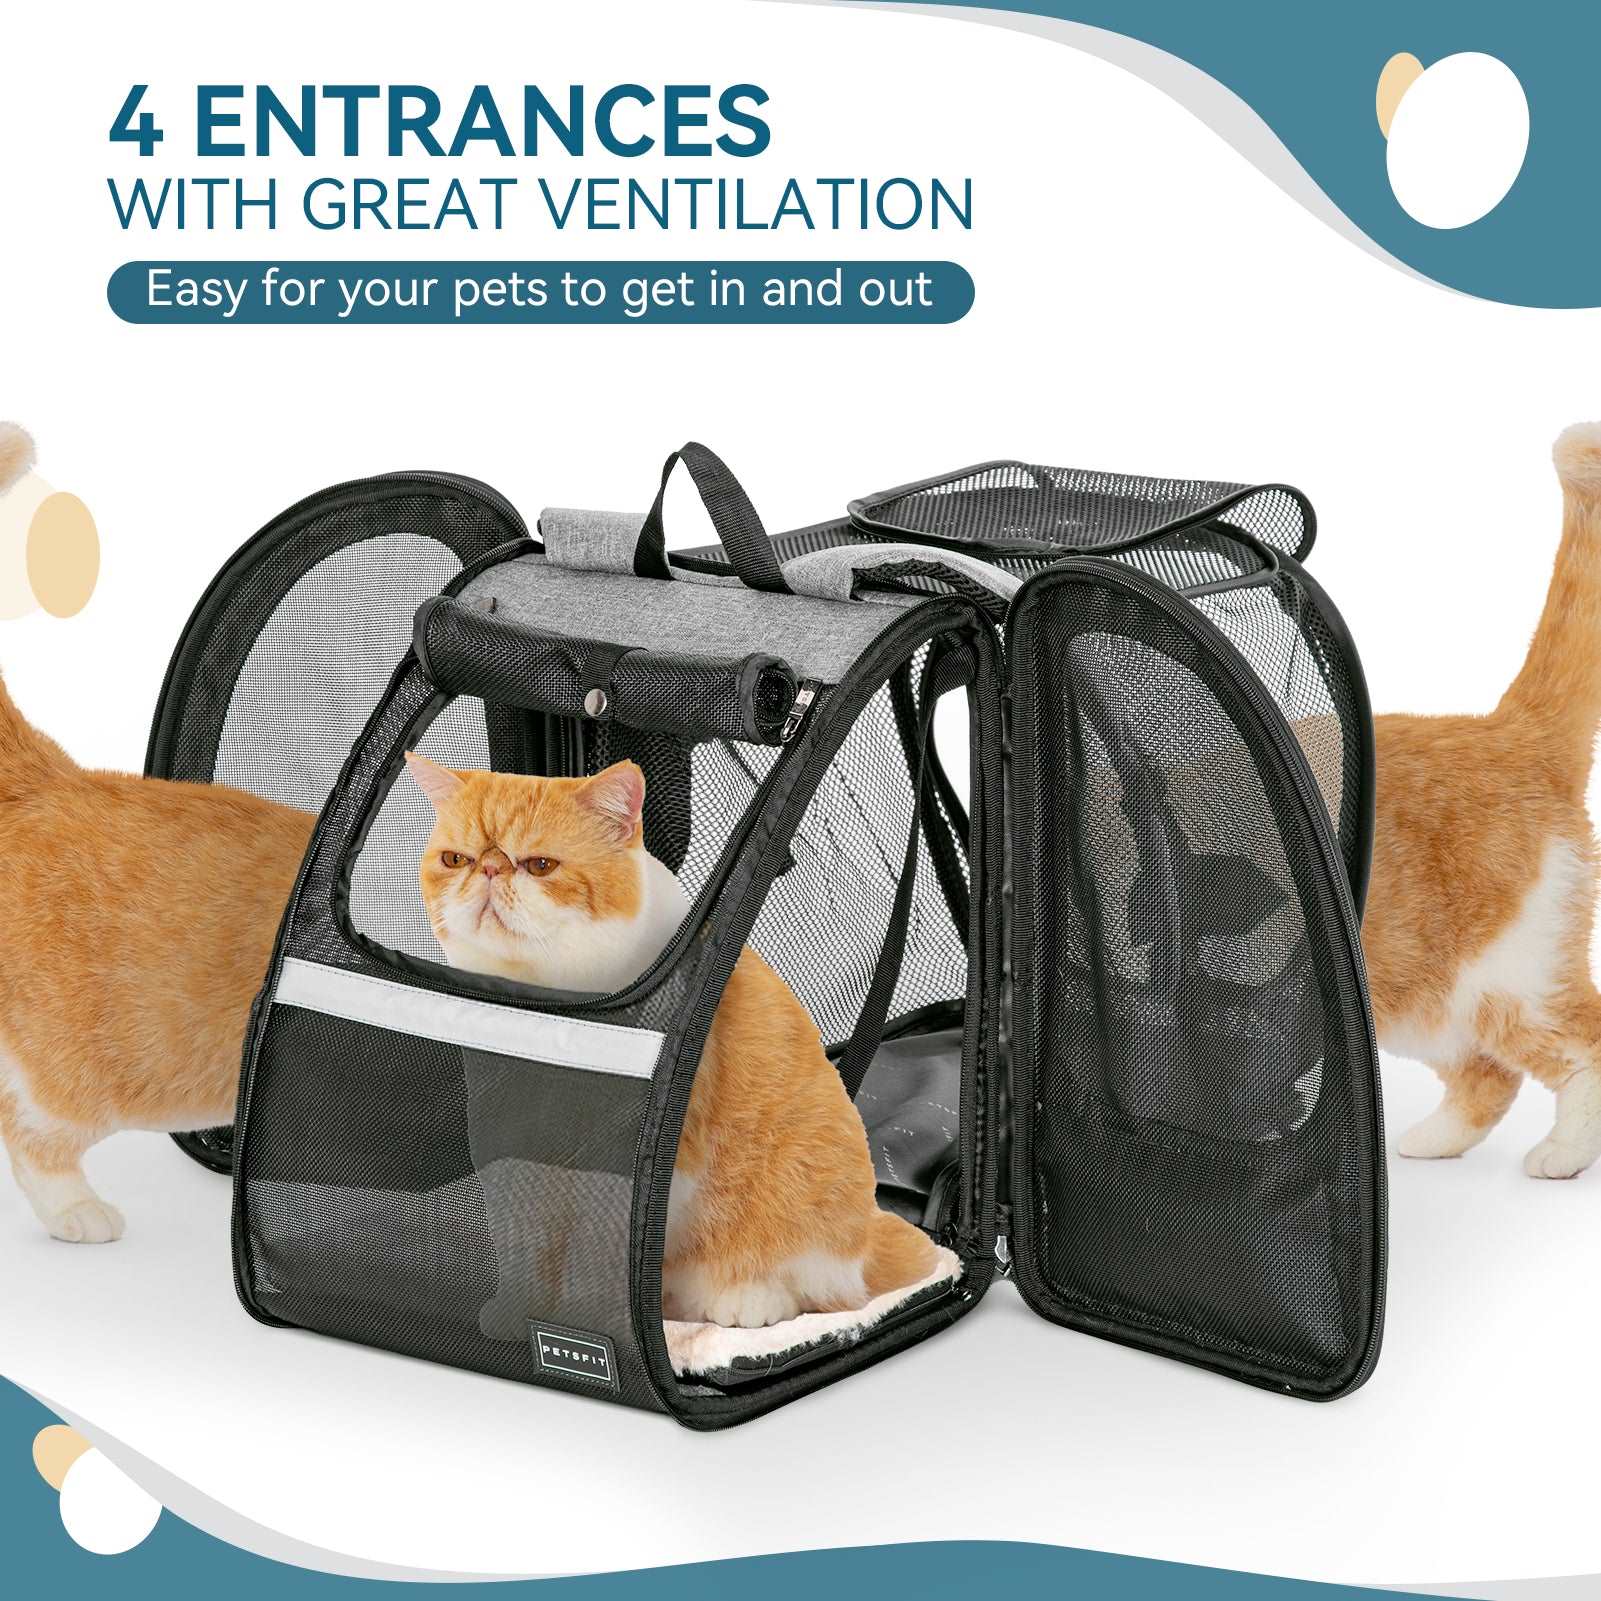 Petsfit-Dog-and-Cat-Backpack-Carrier-Expandable-with-Great-Ventilation-05